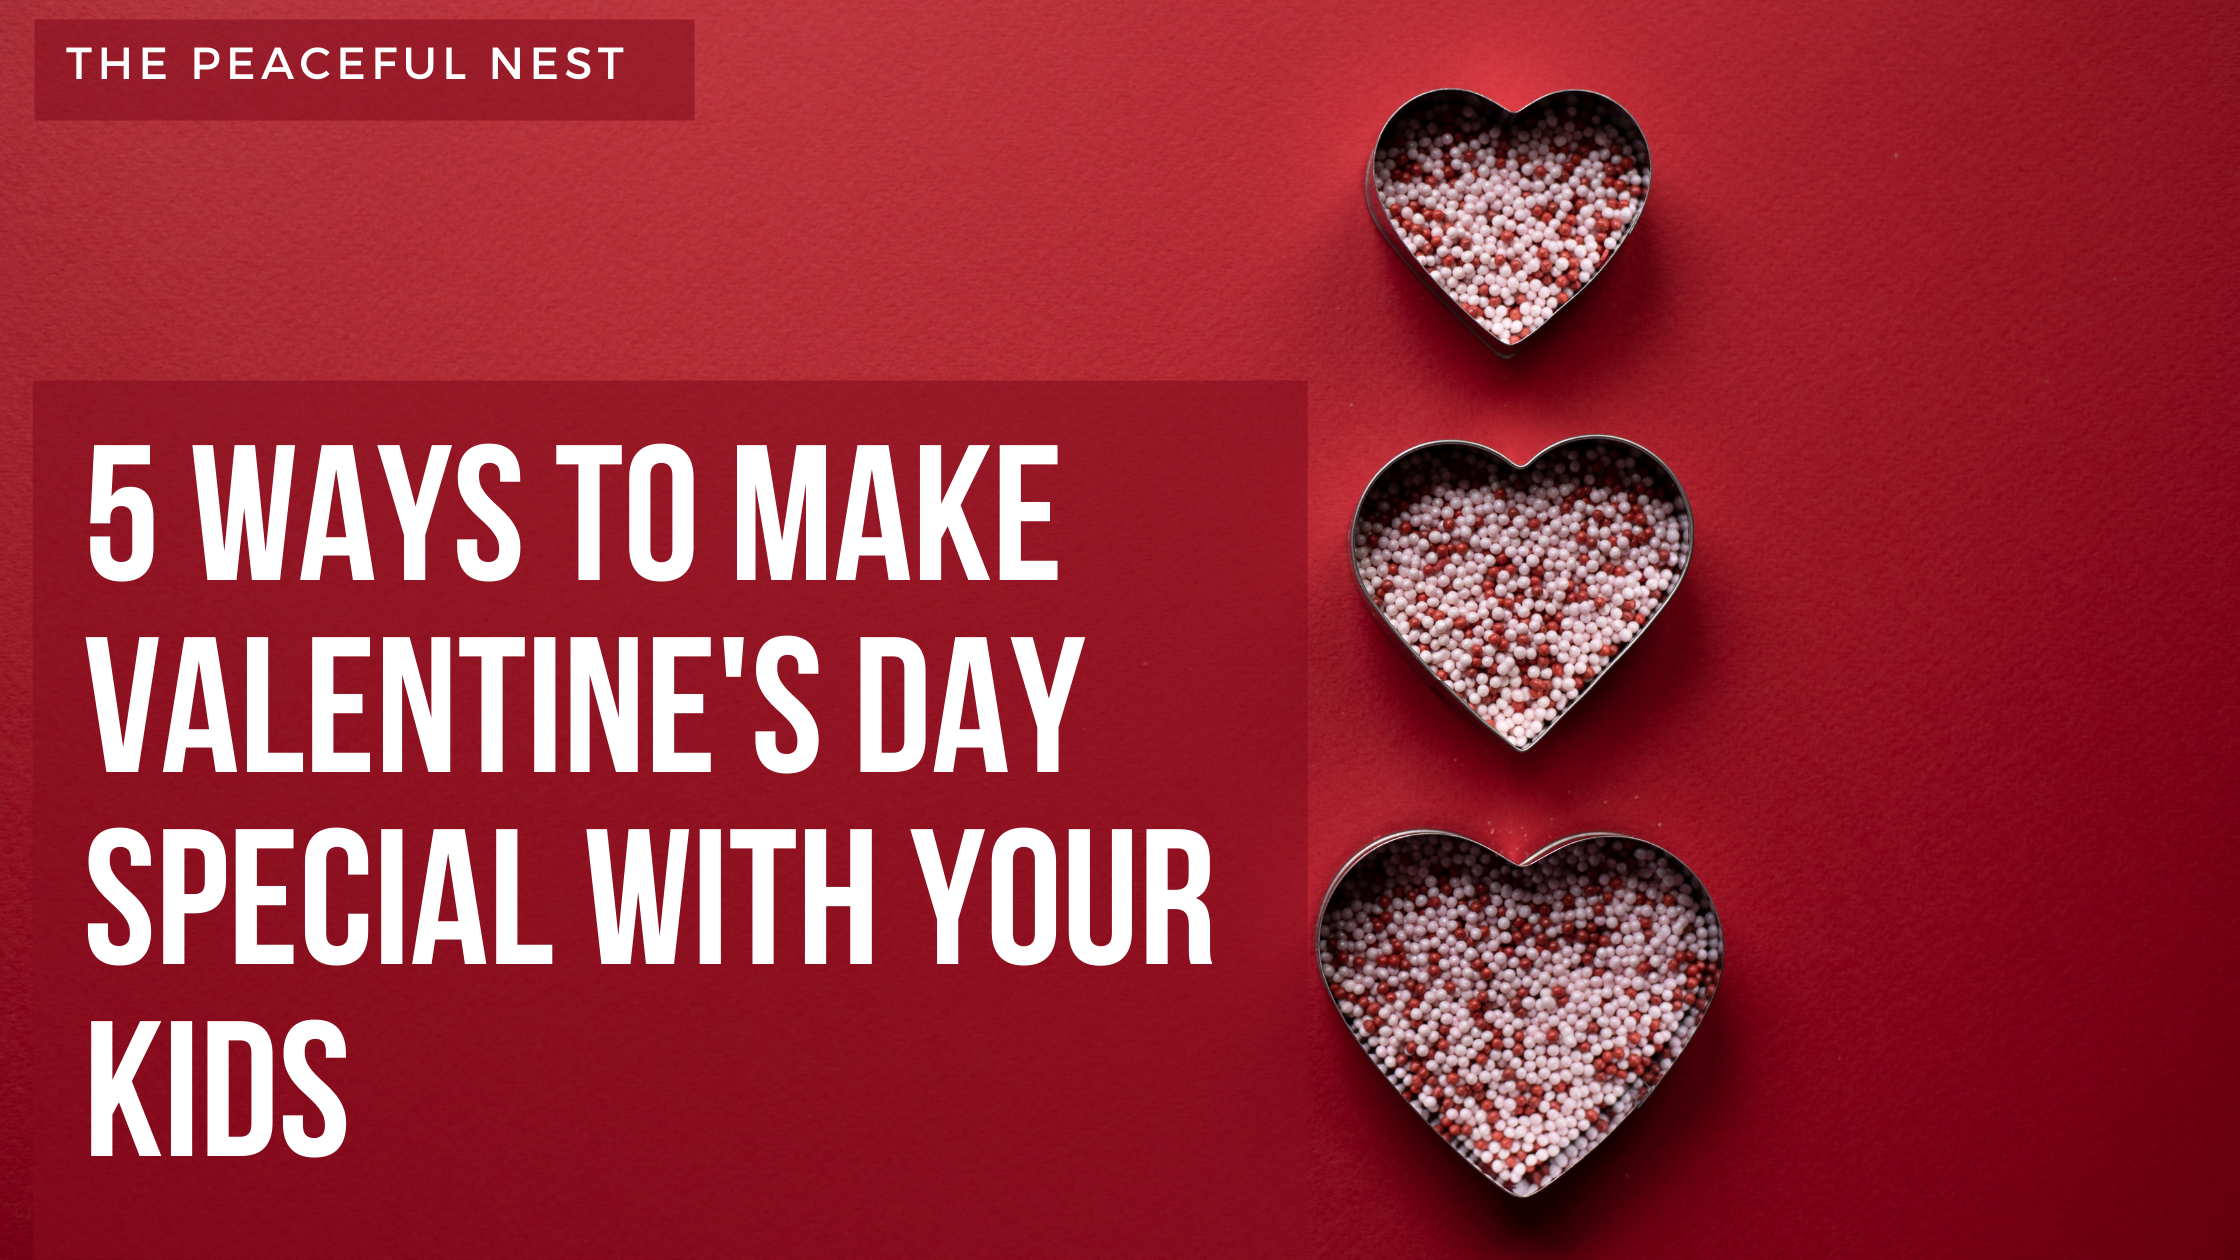 5 Ways to Make Valentine’s Day Special With Your Kids